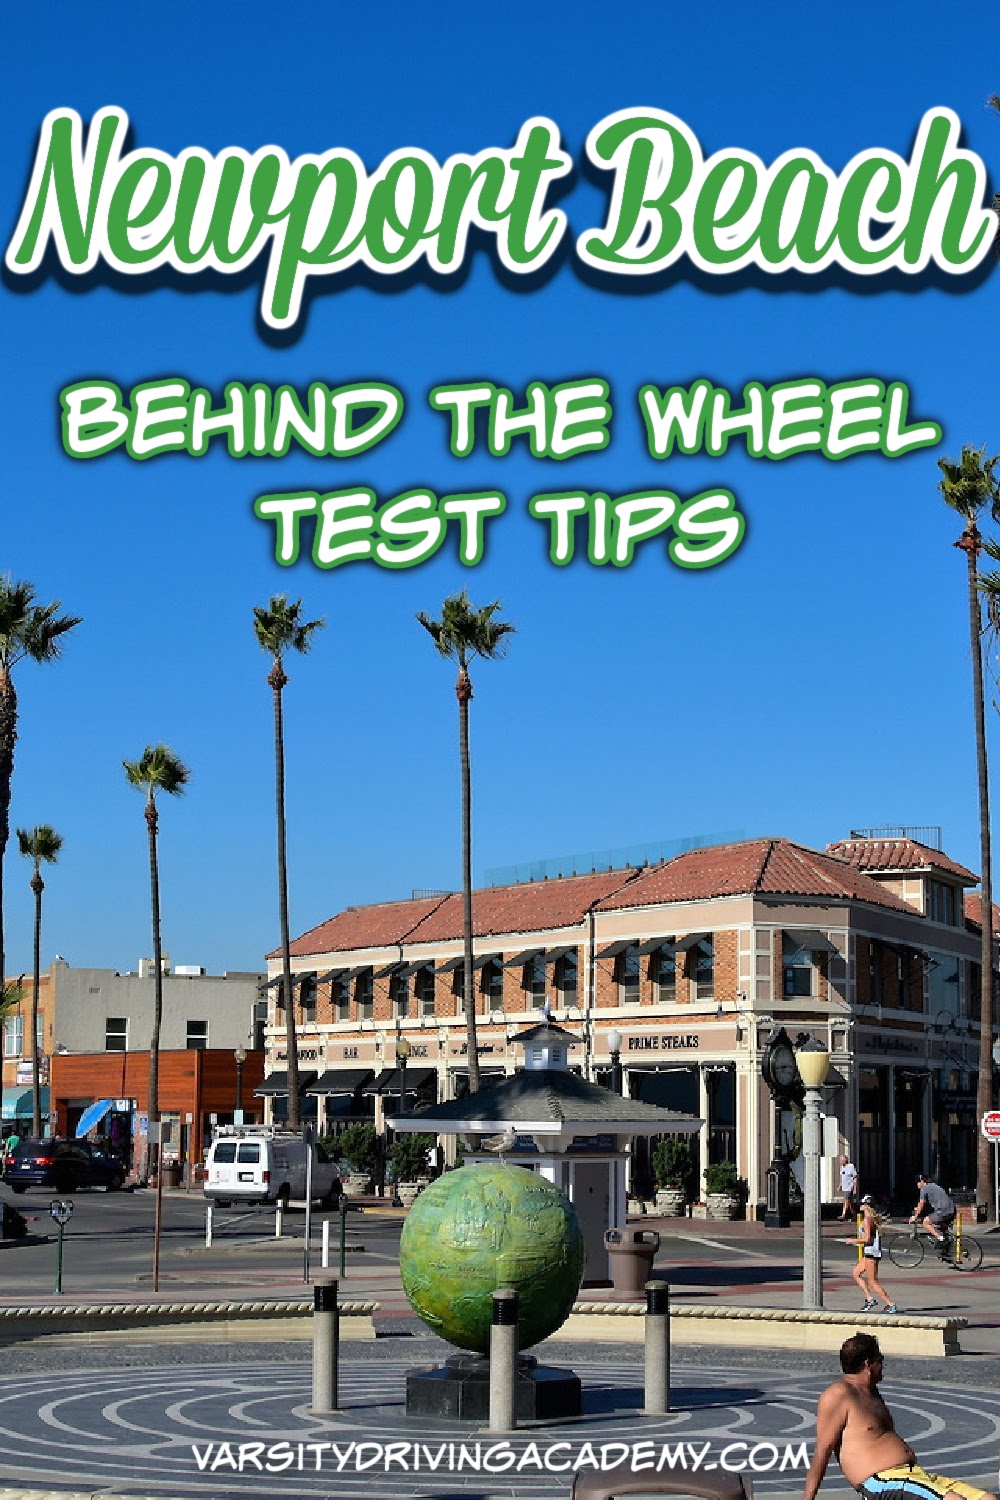 Varsity Driving Academy is ready to prepare you for the Newport Beach behind the wheel test with the basics as well as a few tips and tricks.